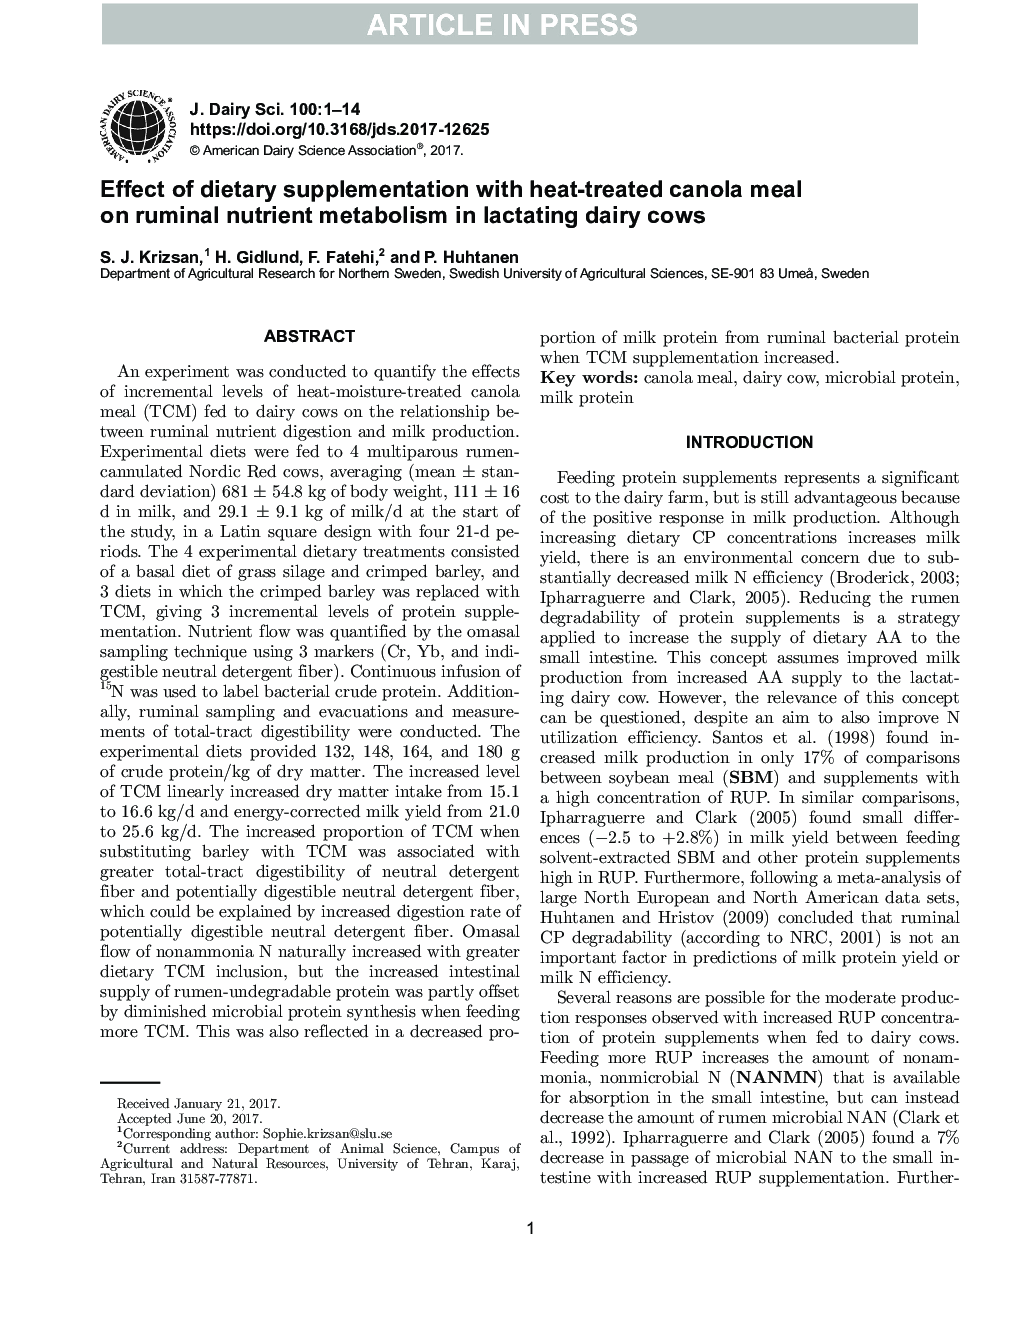 Effect of dietary supplementation with heat-treated canola meal on ruminal nutrient metabolism in lactating dairy cows